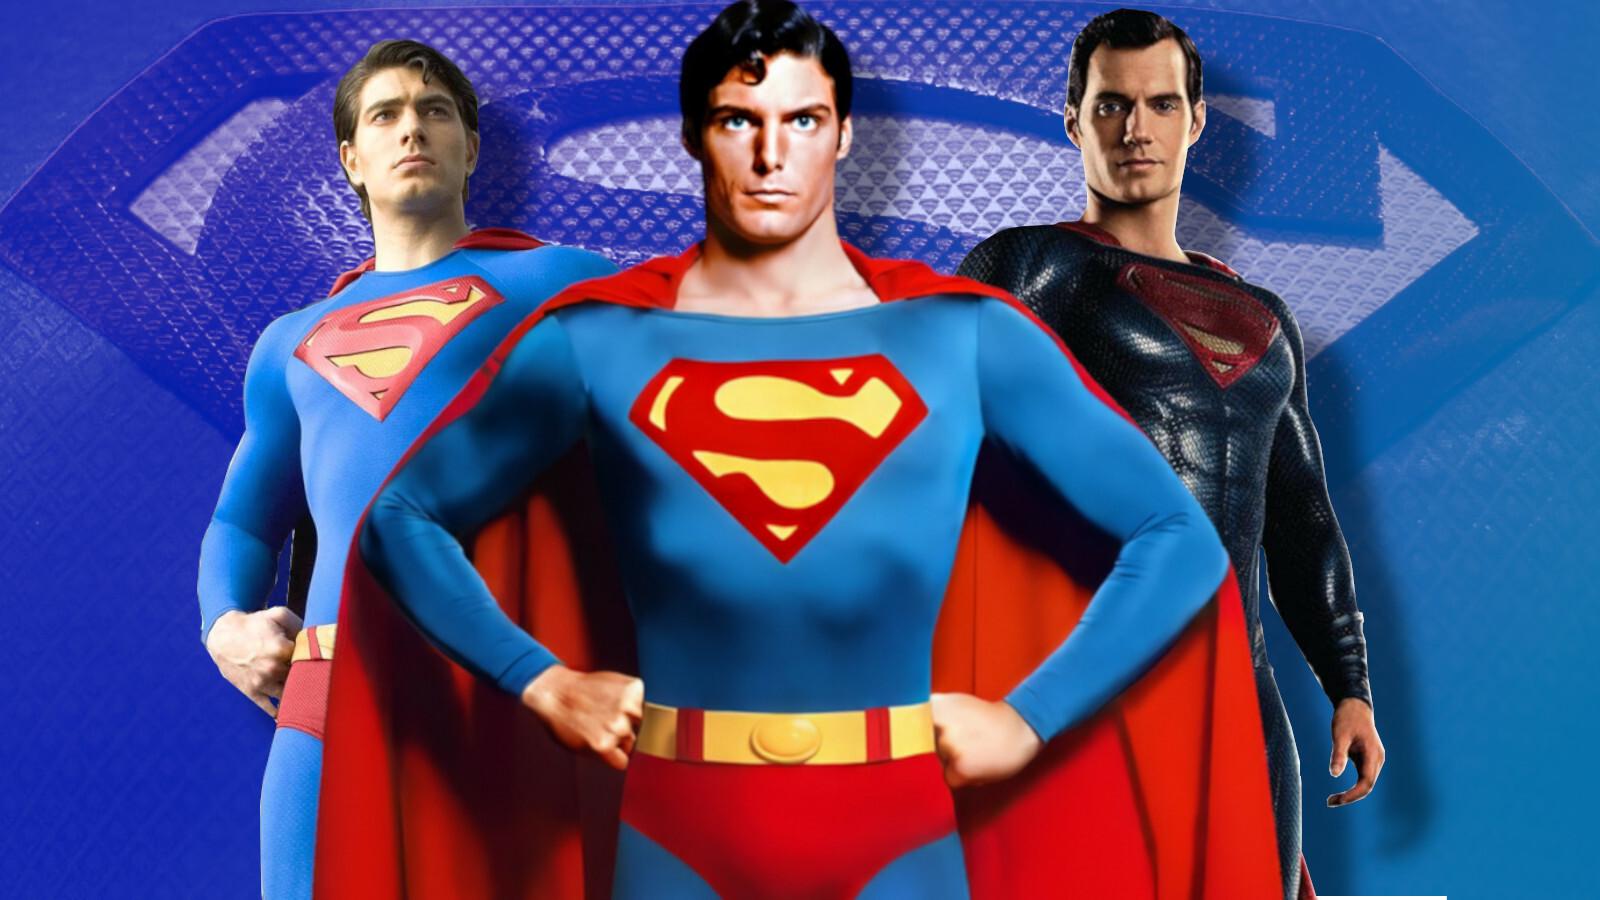 Brandon Routh, Christopher Reeve, and Henry Cavill as Superman